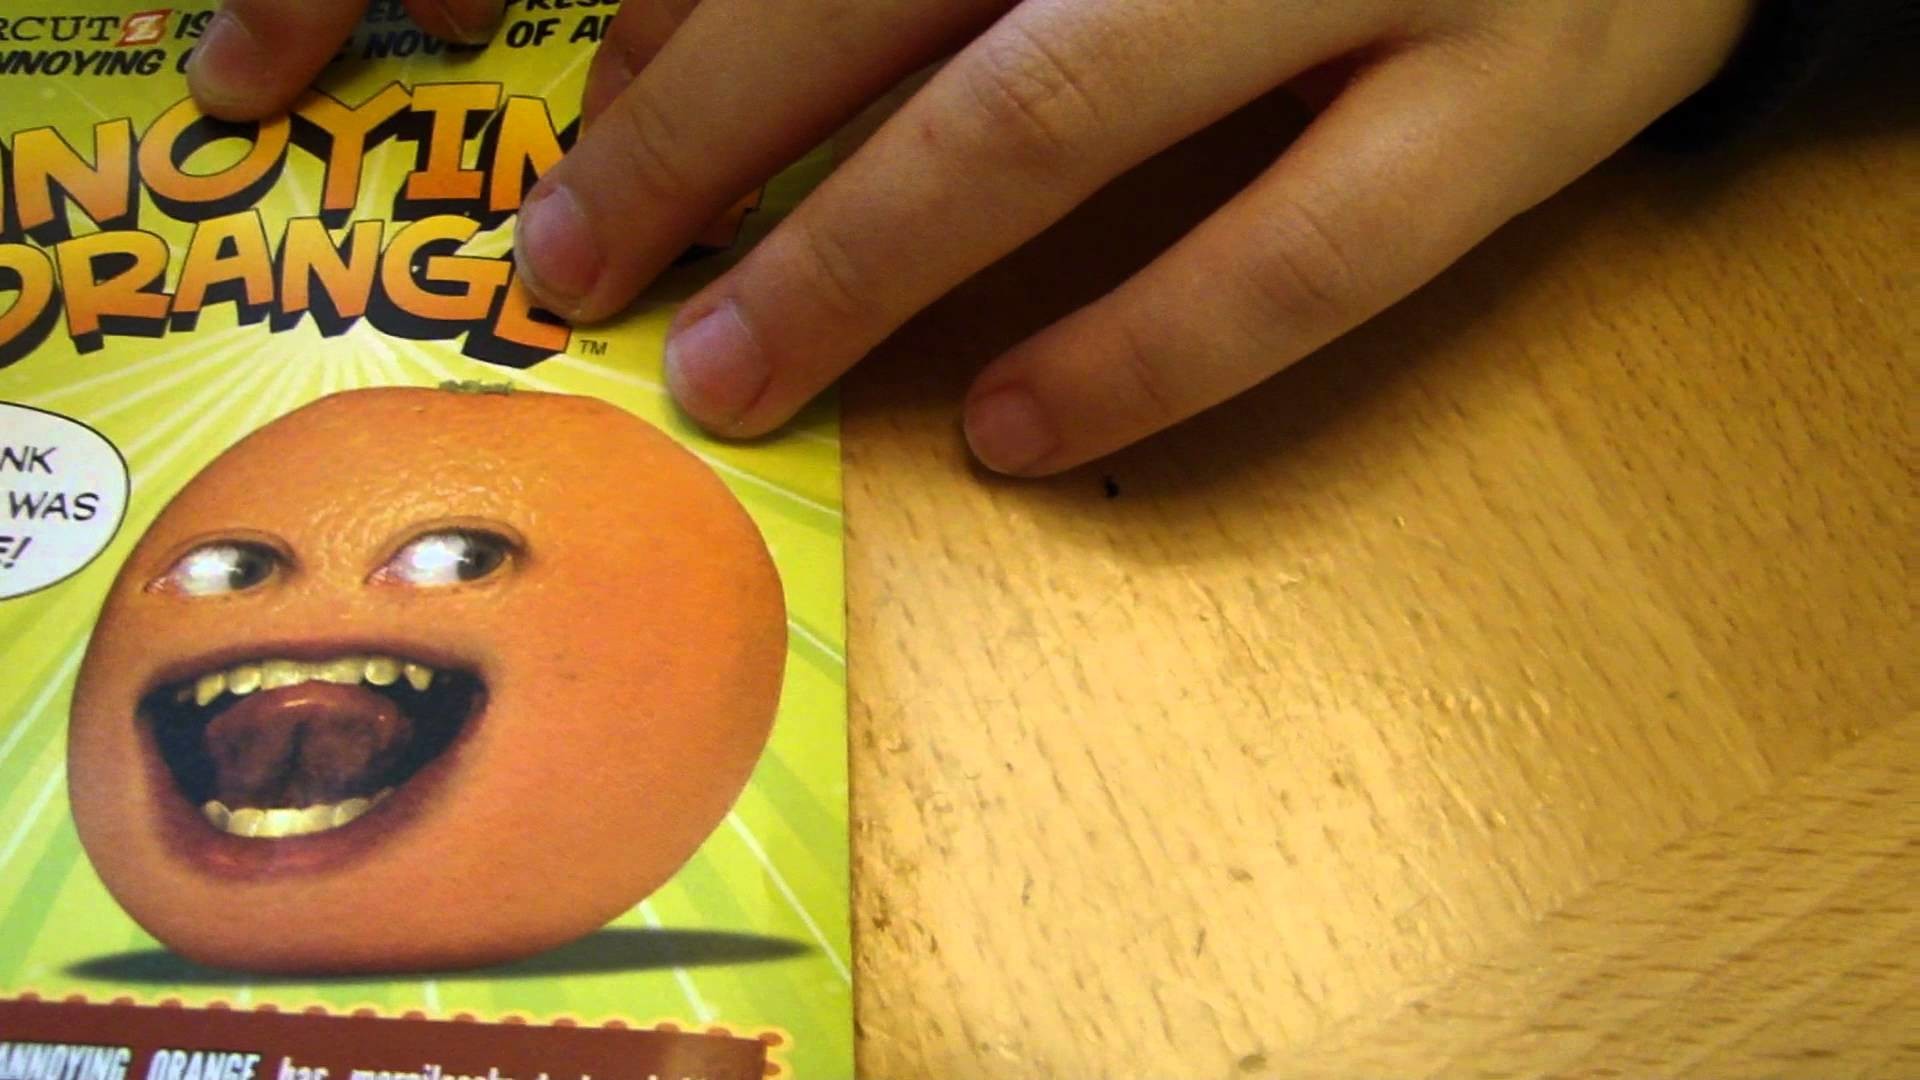 1920x1080 Annoying Orange DVD Vol. 1 Escape from the Kitchen by Spiderman Jerry -  YouTube